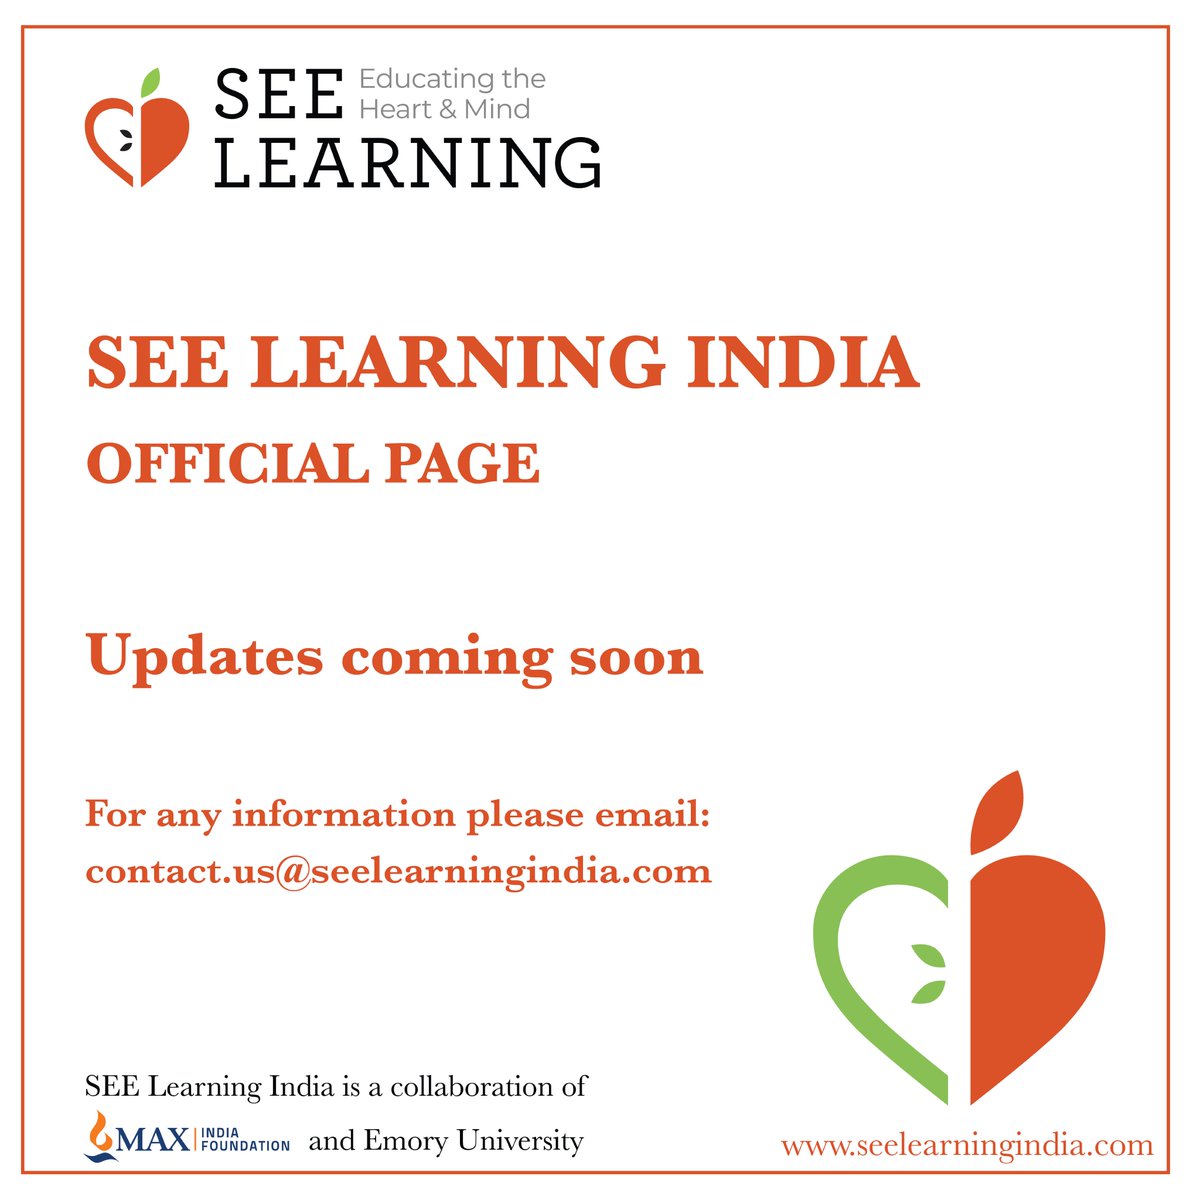 SEE Learning India 

The time for social , emotional and ethical learning has come.

@maxindiafoundation @MaxGroup @holisticlearning @India